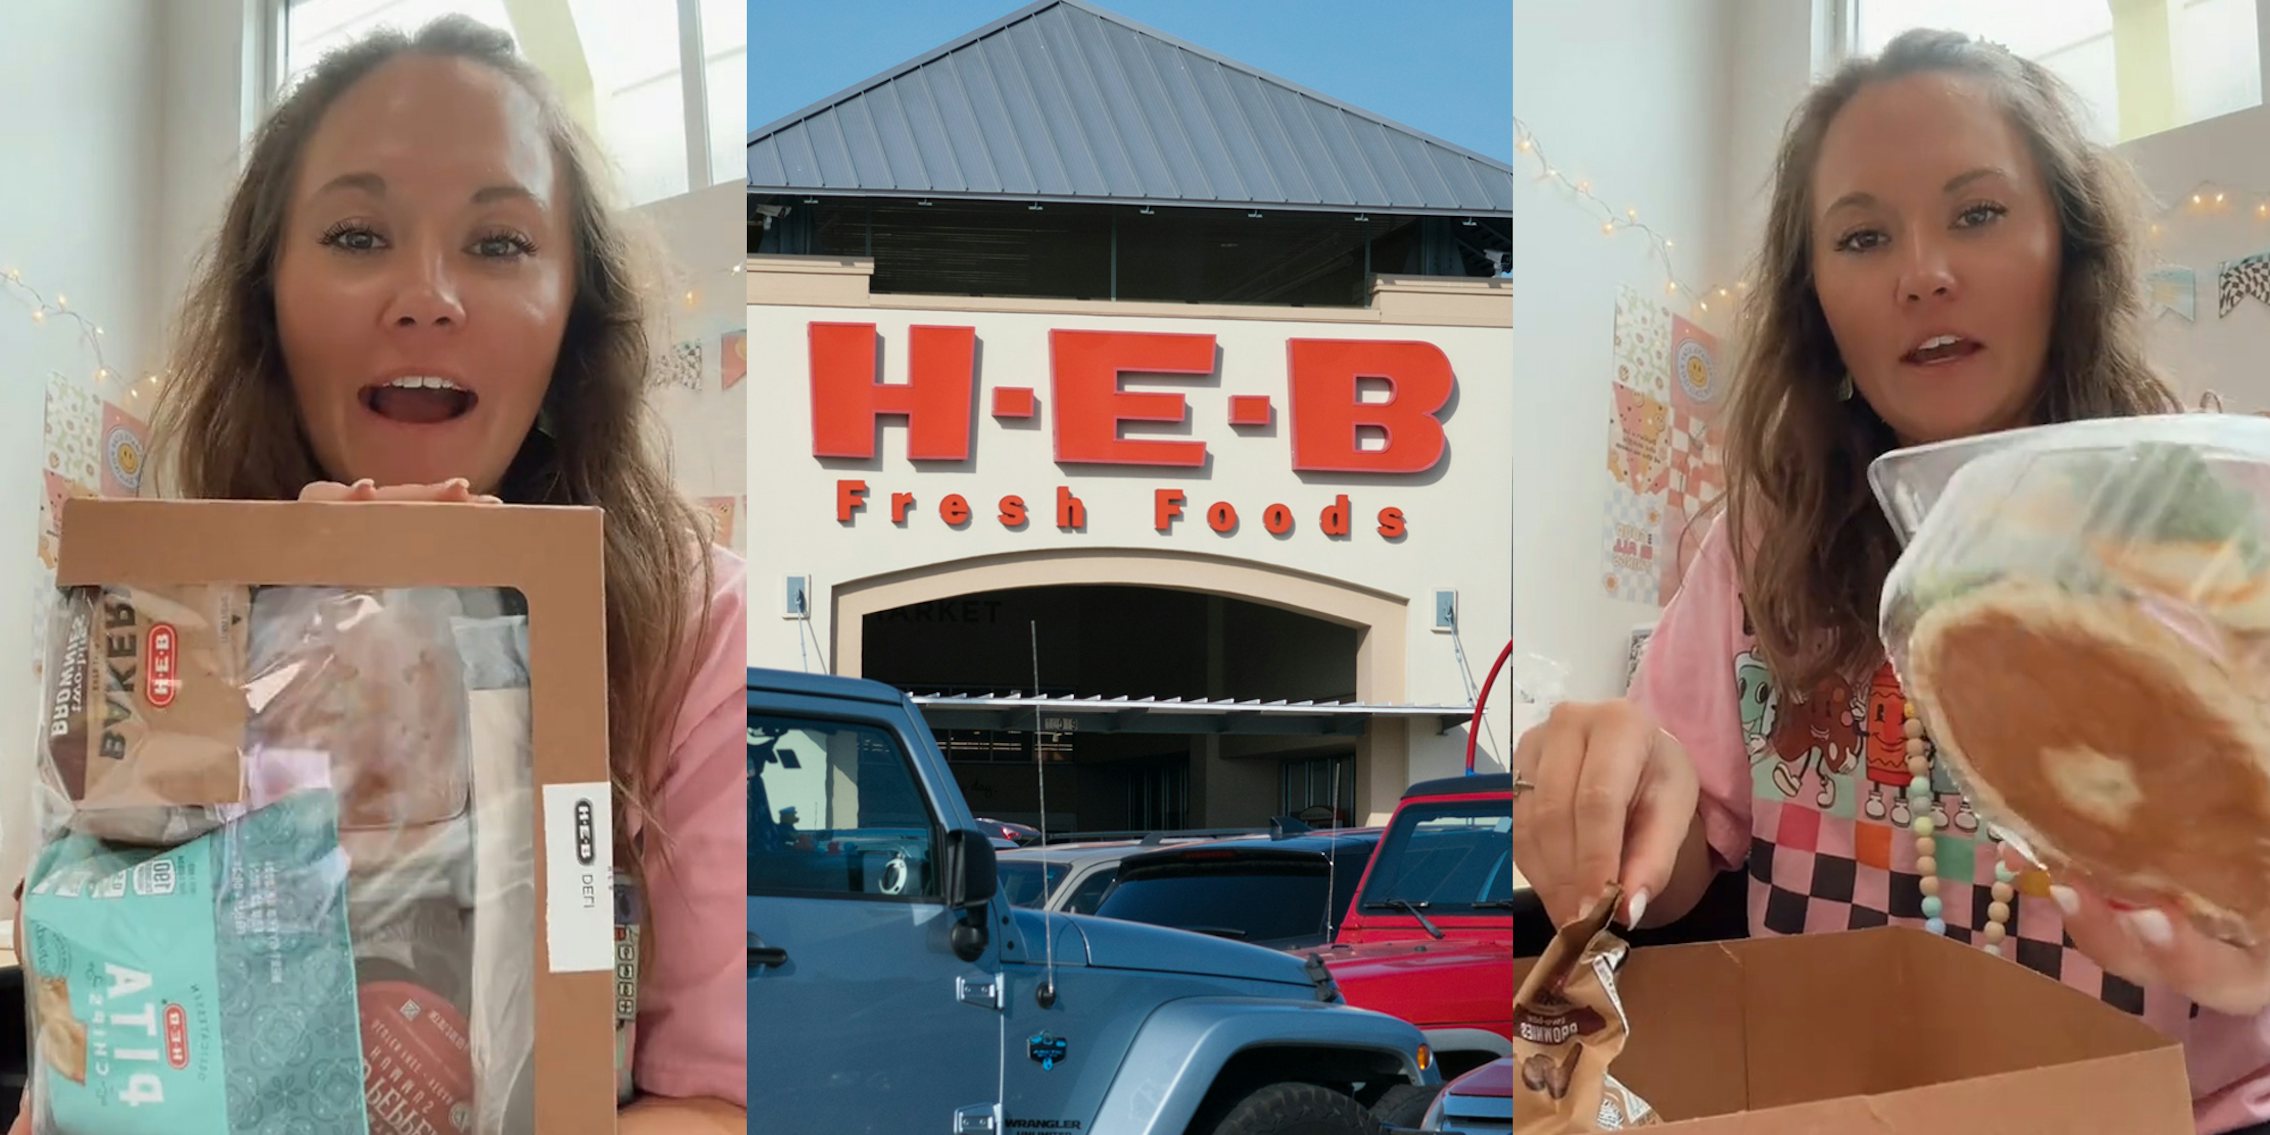 H-E-B customer speaking with meal in box (l) H-E-B building with sign (c) H-E-B customer speaking with meal in box (r)